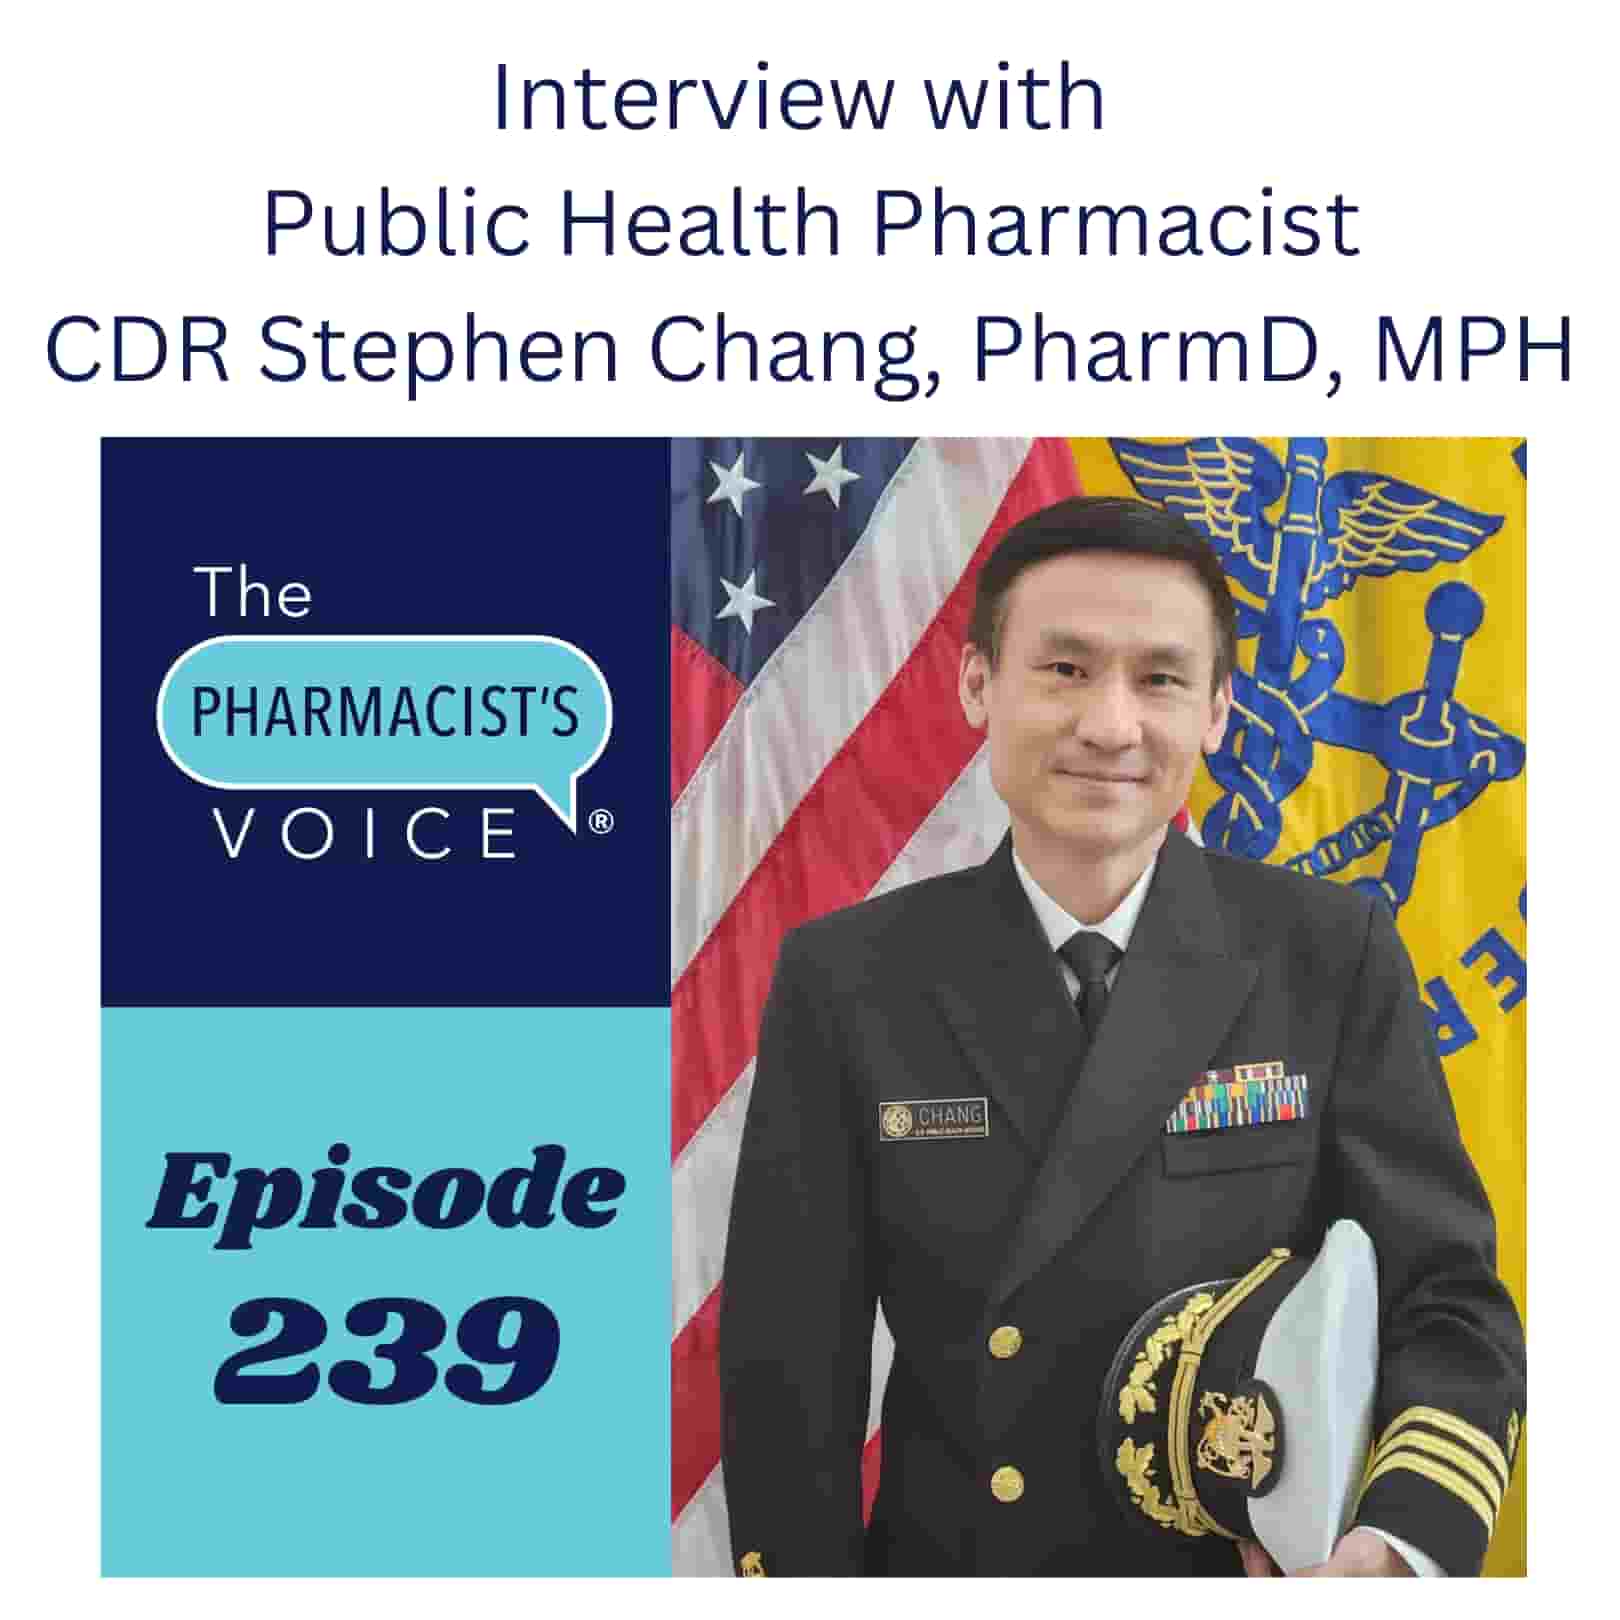 The Pharmacist's Voice Podcast Episode 239. Interview with Public Health Pharmacist CDR Stephen Chang, PharmD, MPH